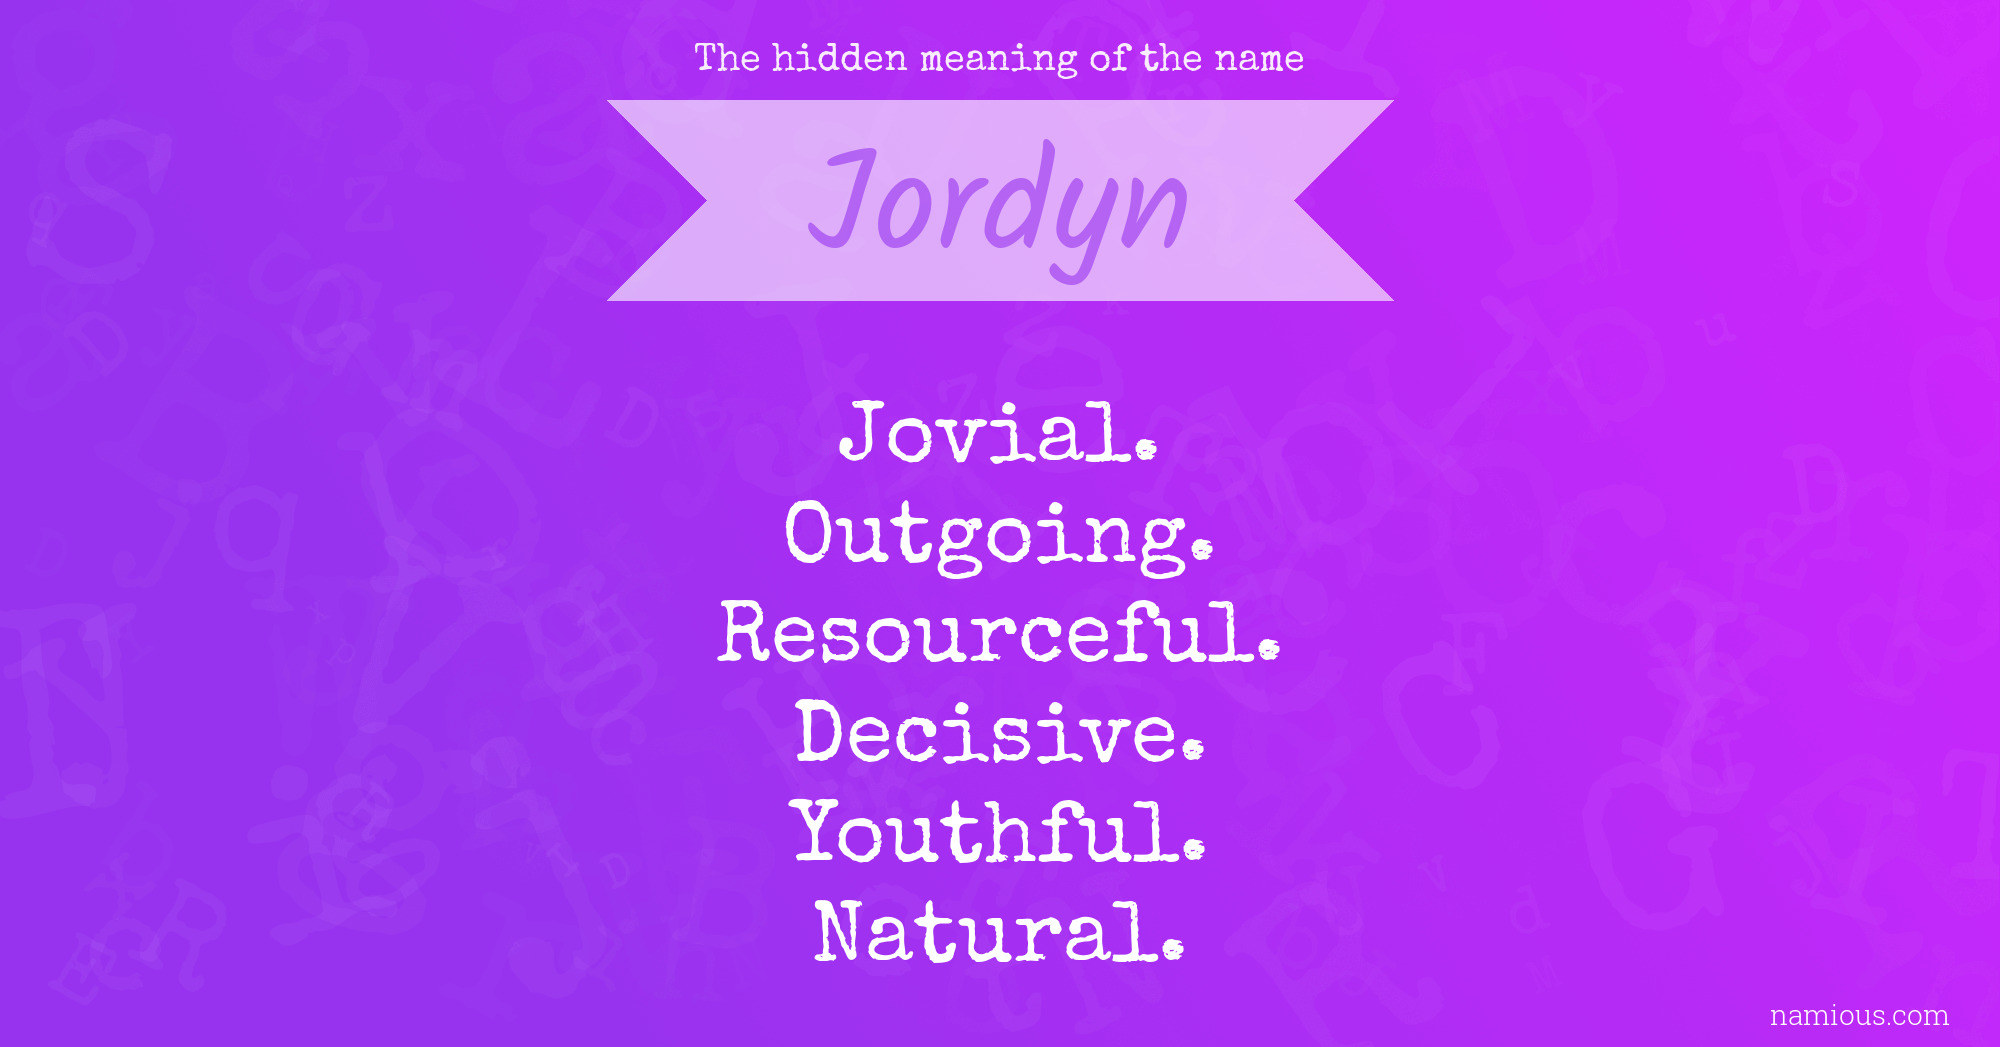 The hidden meaning of the name Jordyn